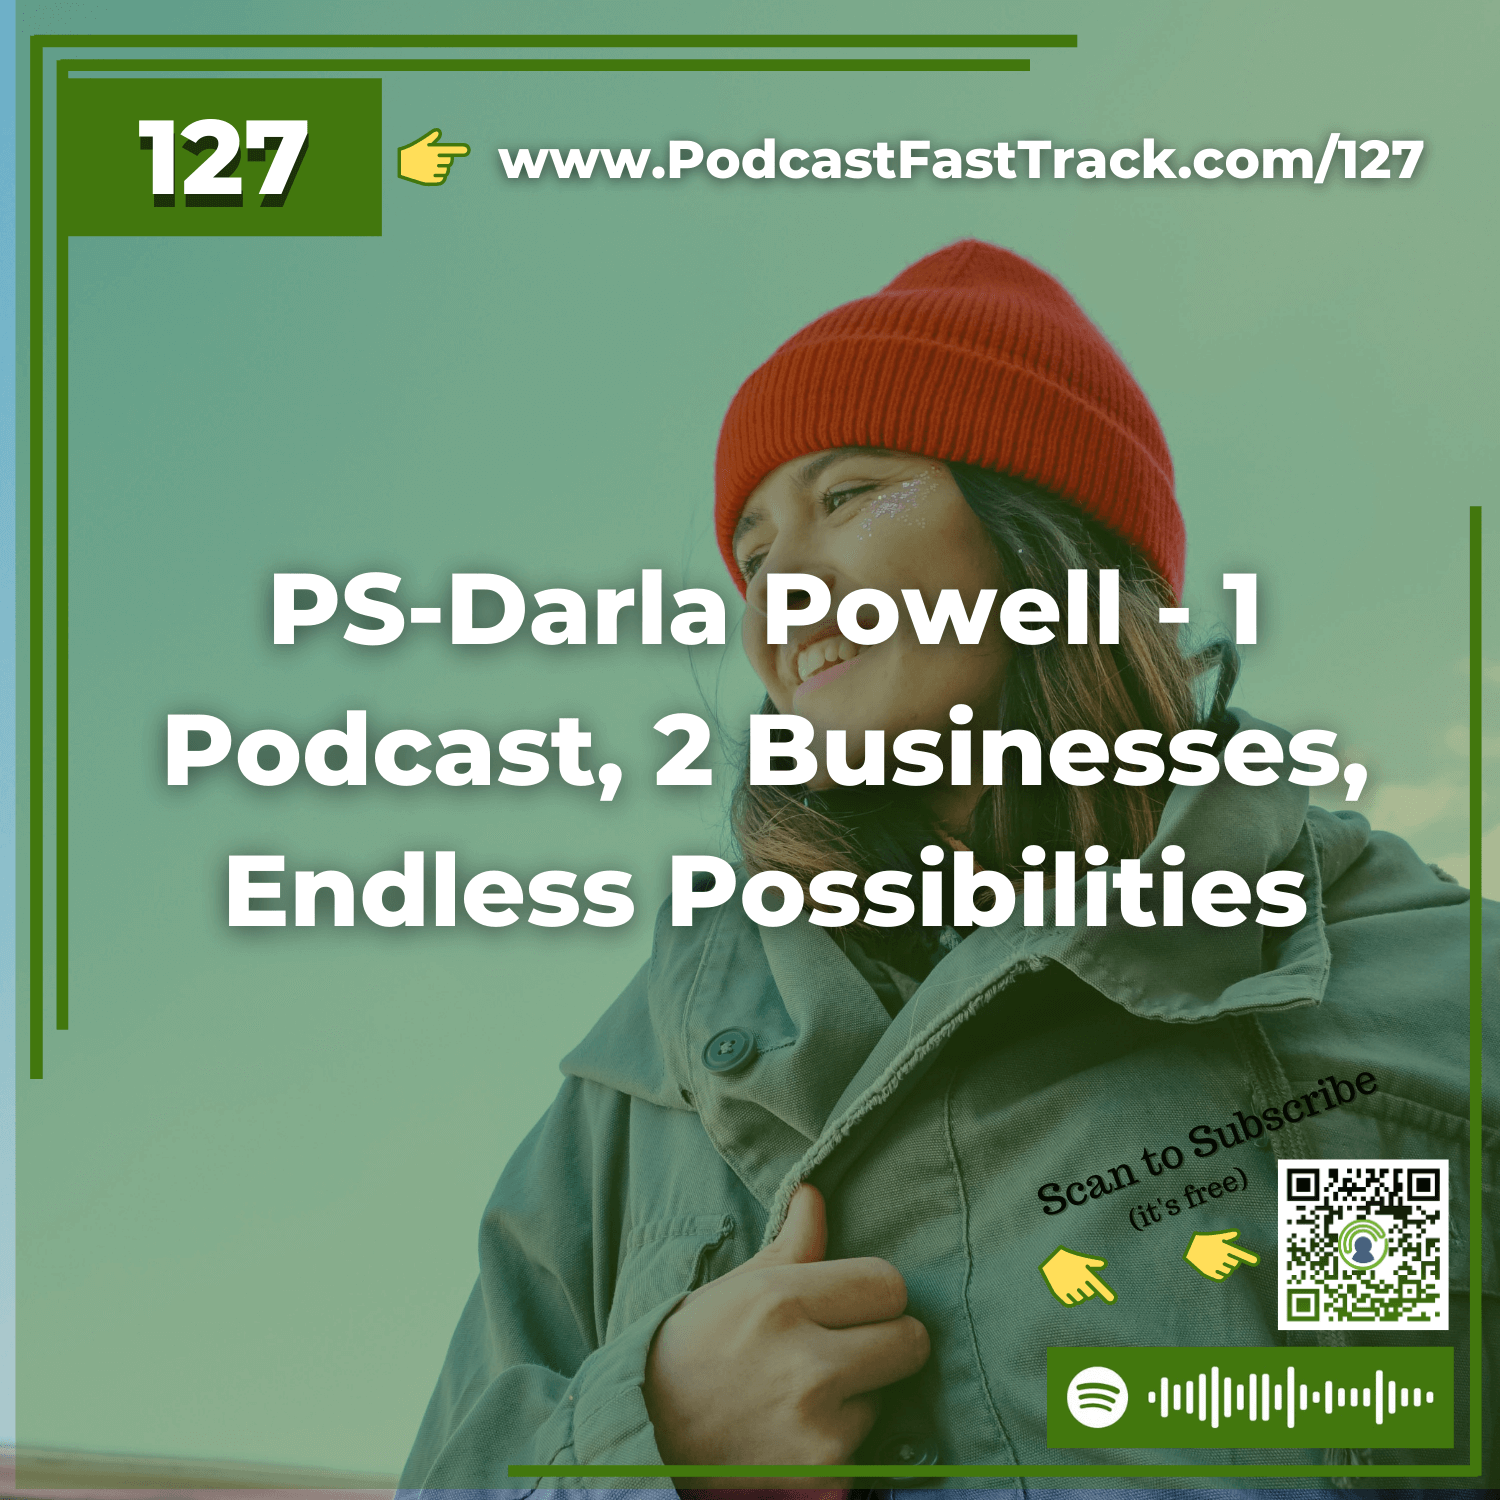 127: PS-Darla Powell - 1 Podcast, 2 Businesses, Endless Possibilities